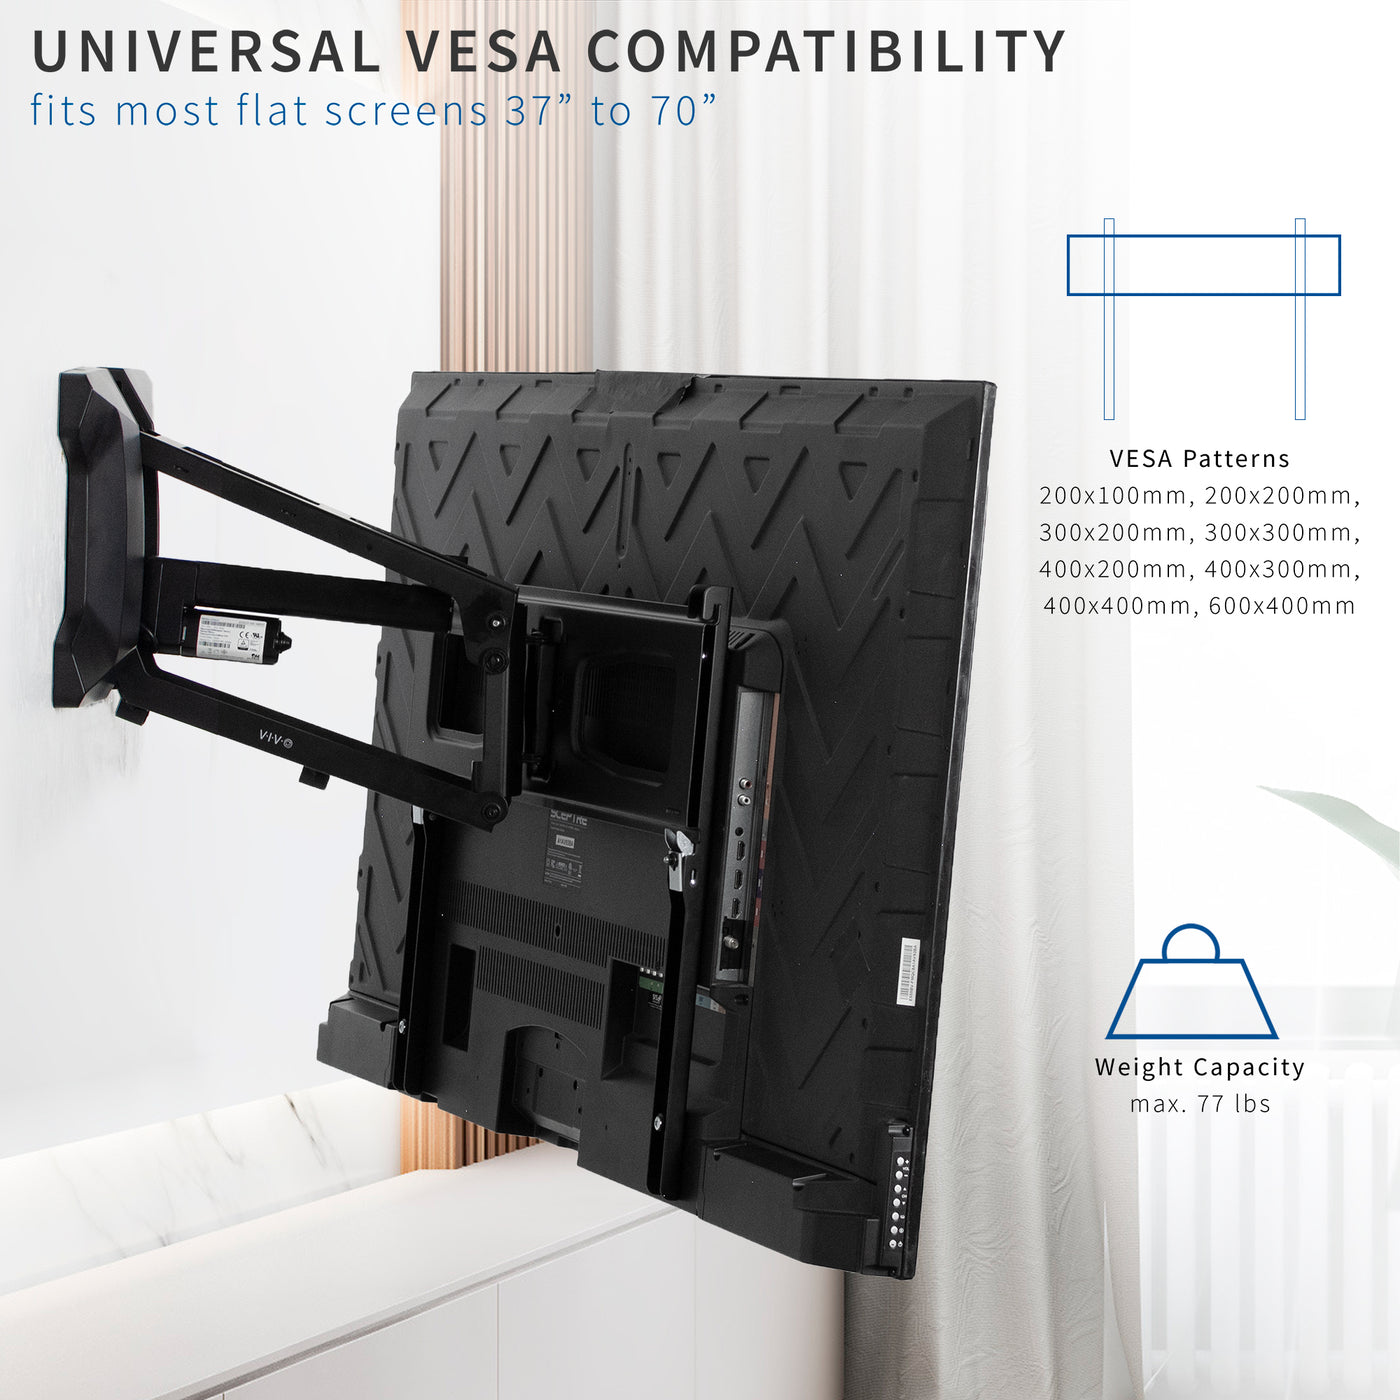 Sturdy mount securely supporting medium to large TVs with universal VESA compatibility.